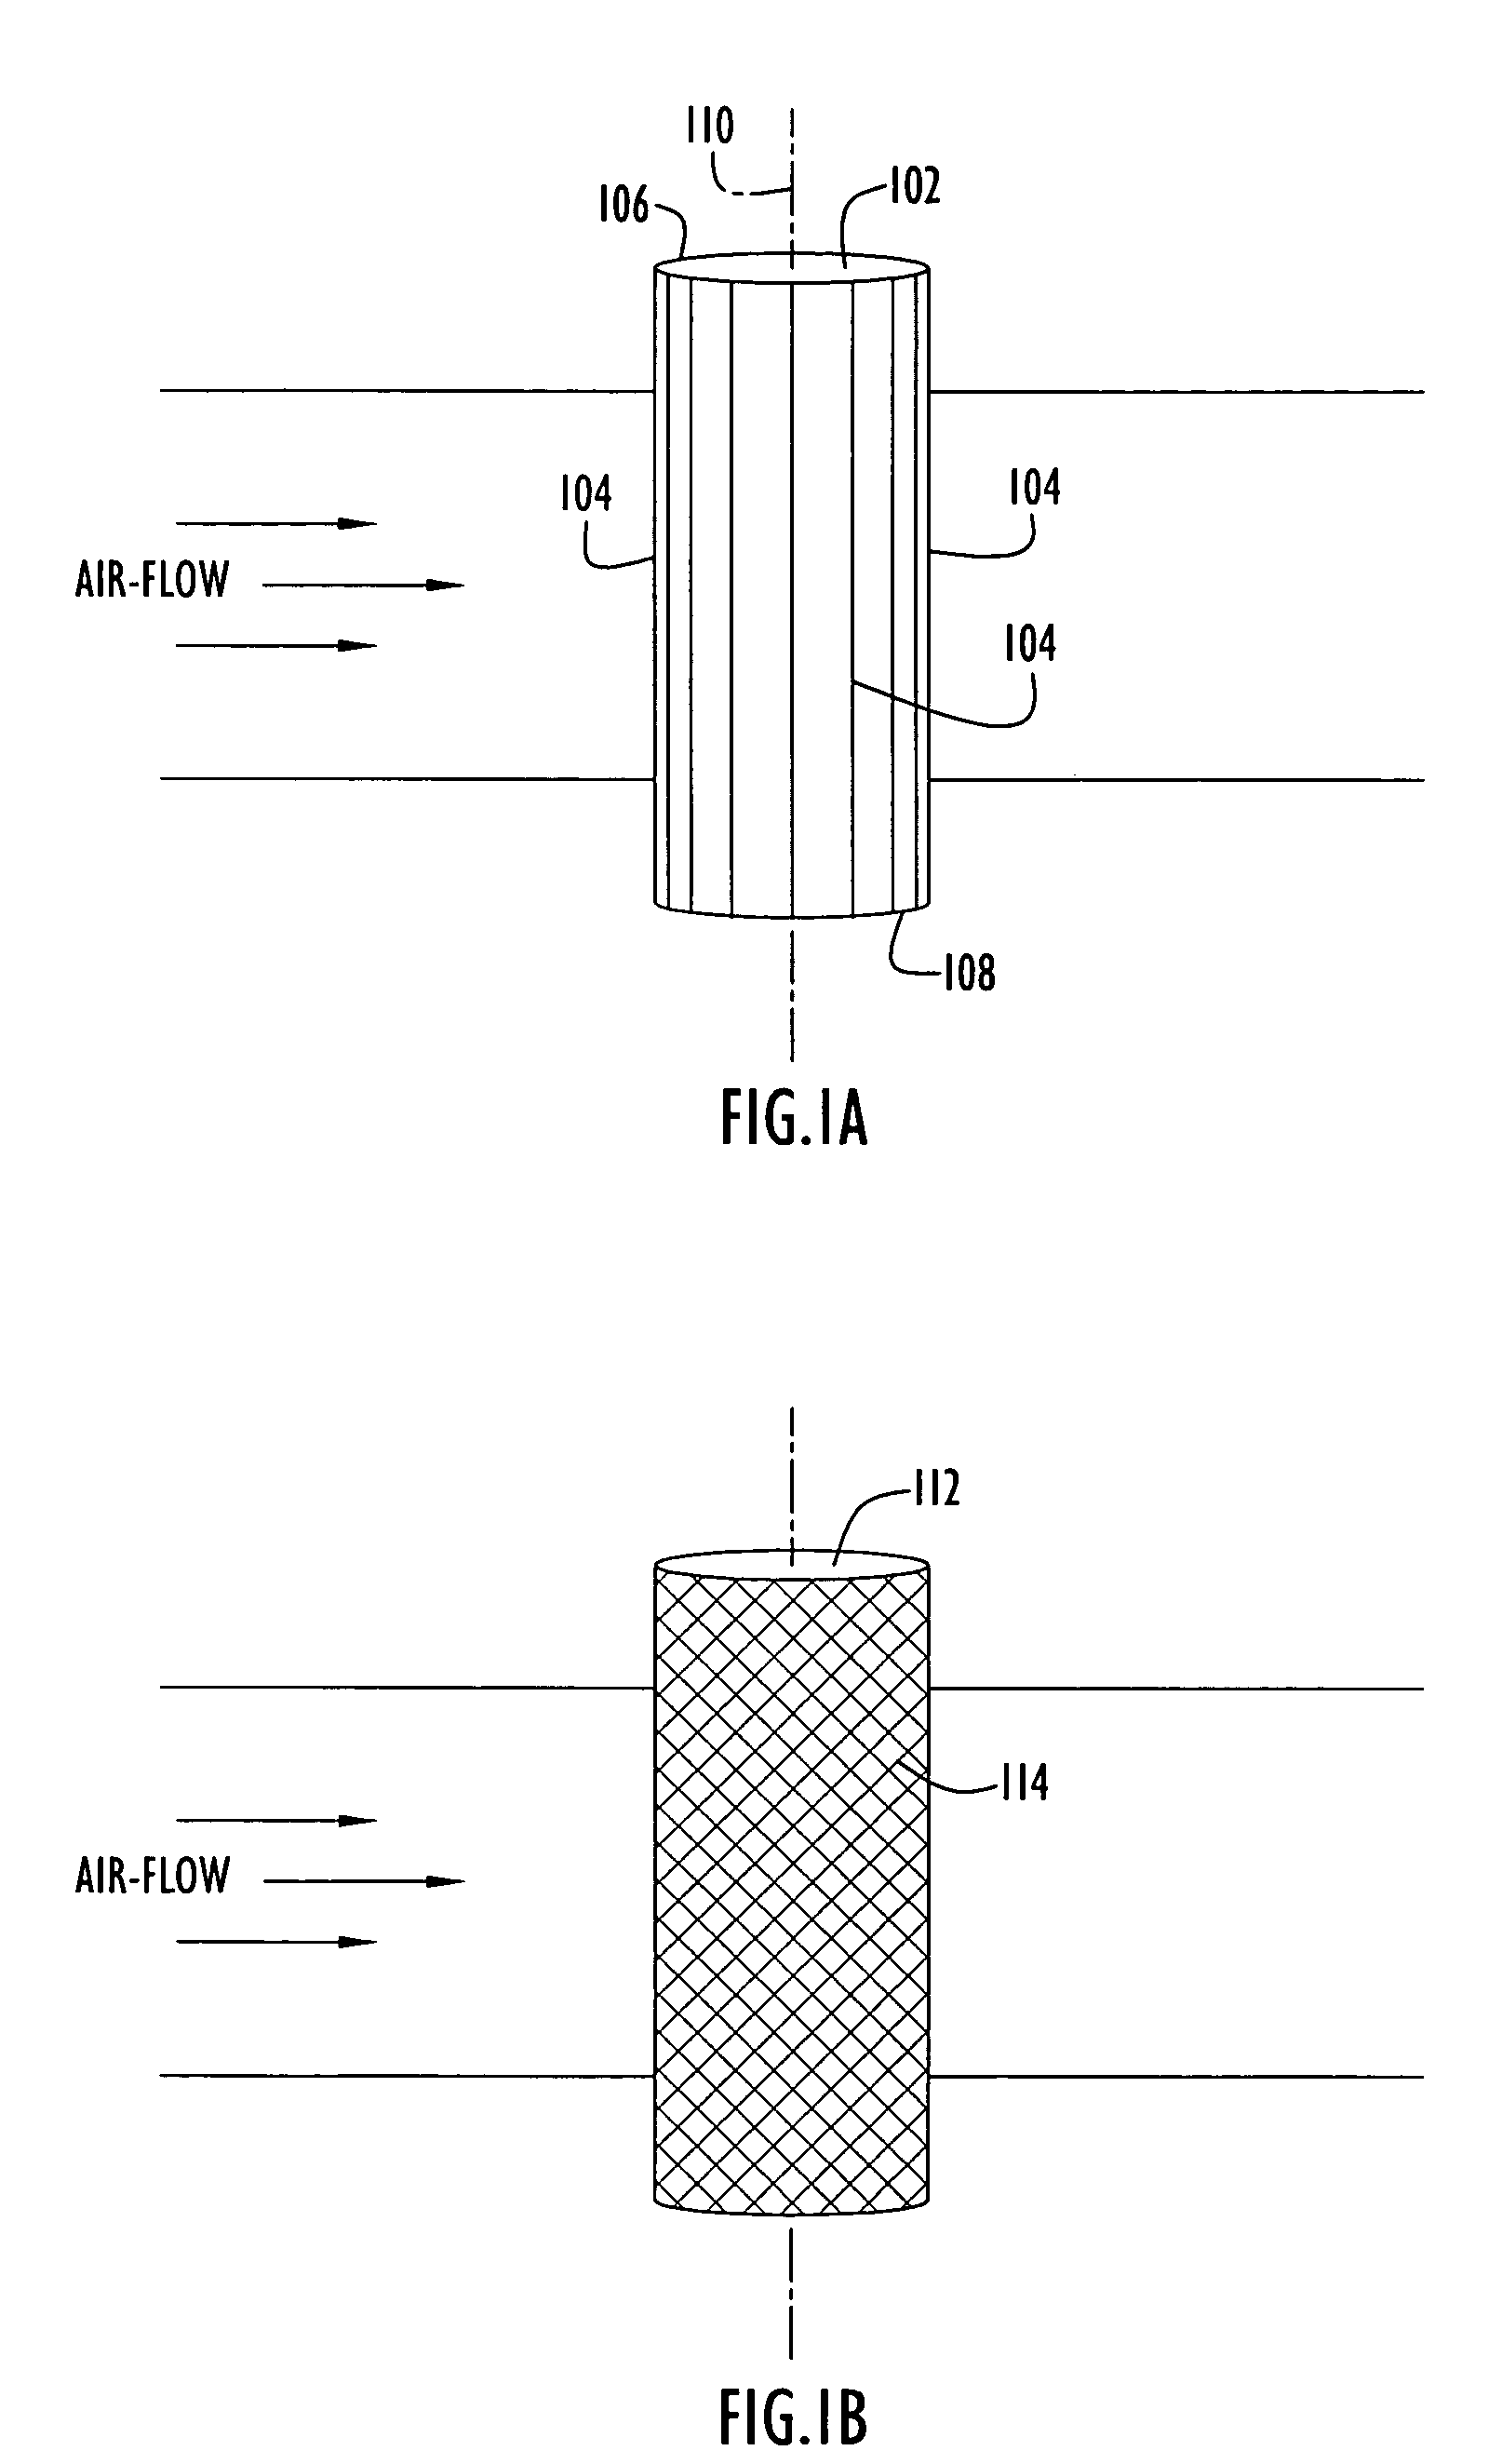 Method and apparatus for filtering particulate matter from an air-flow